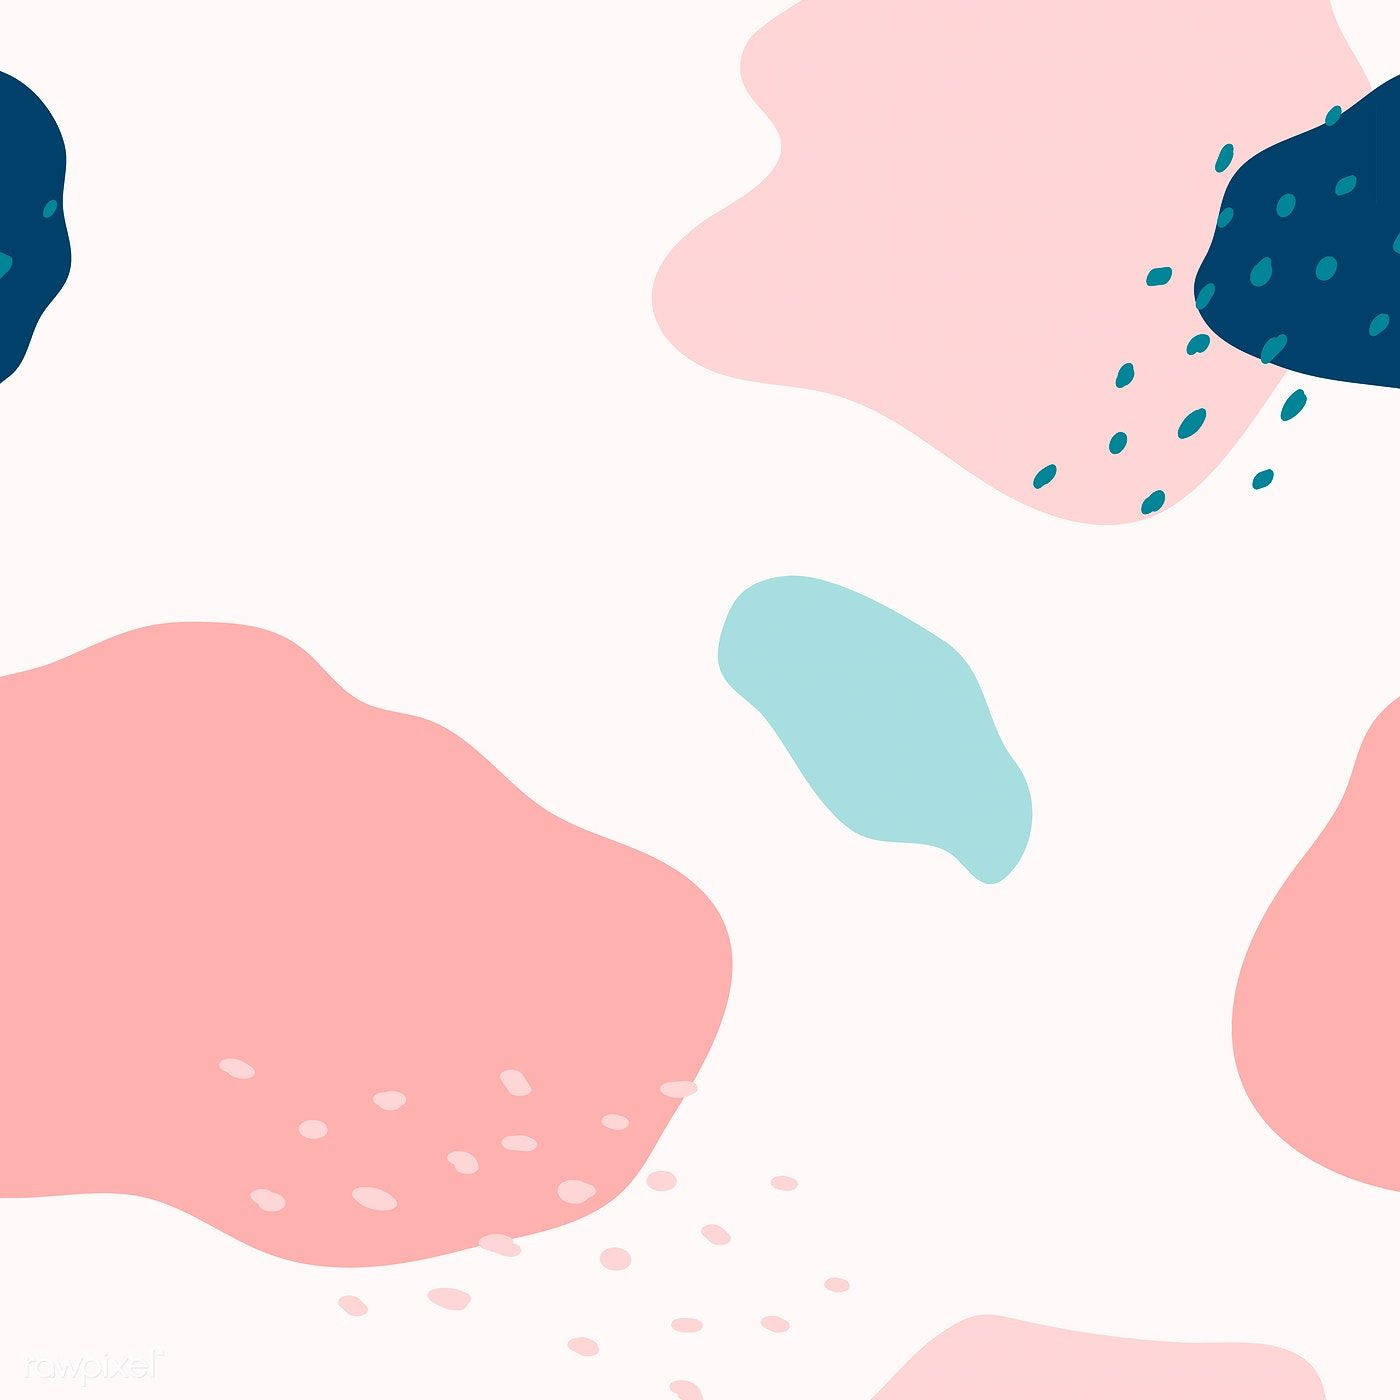 Cute Pastel Pink And Blue Blobs Background